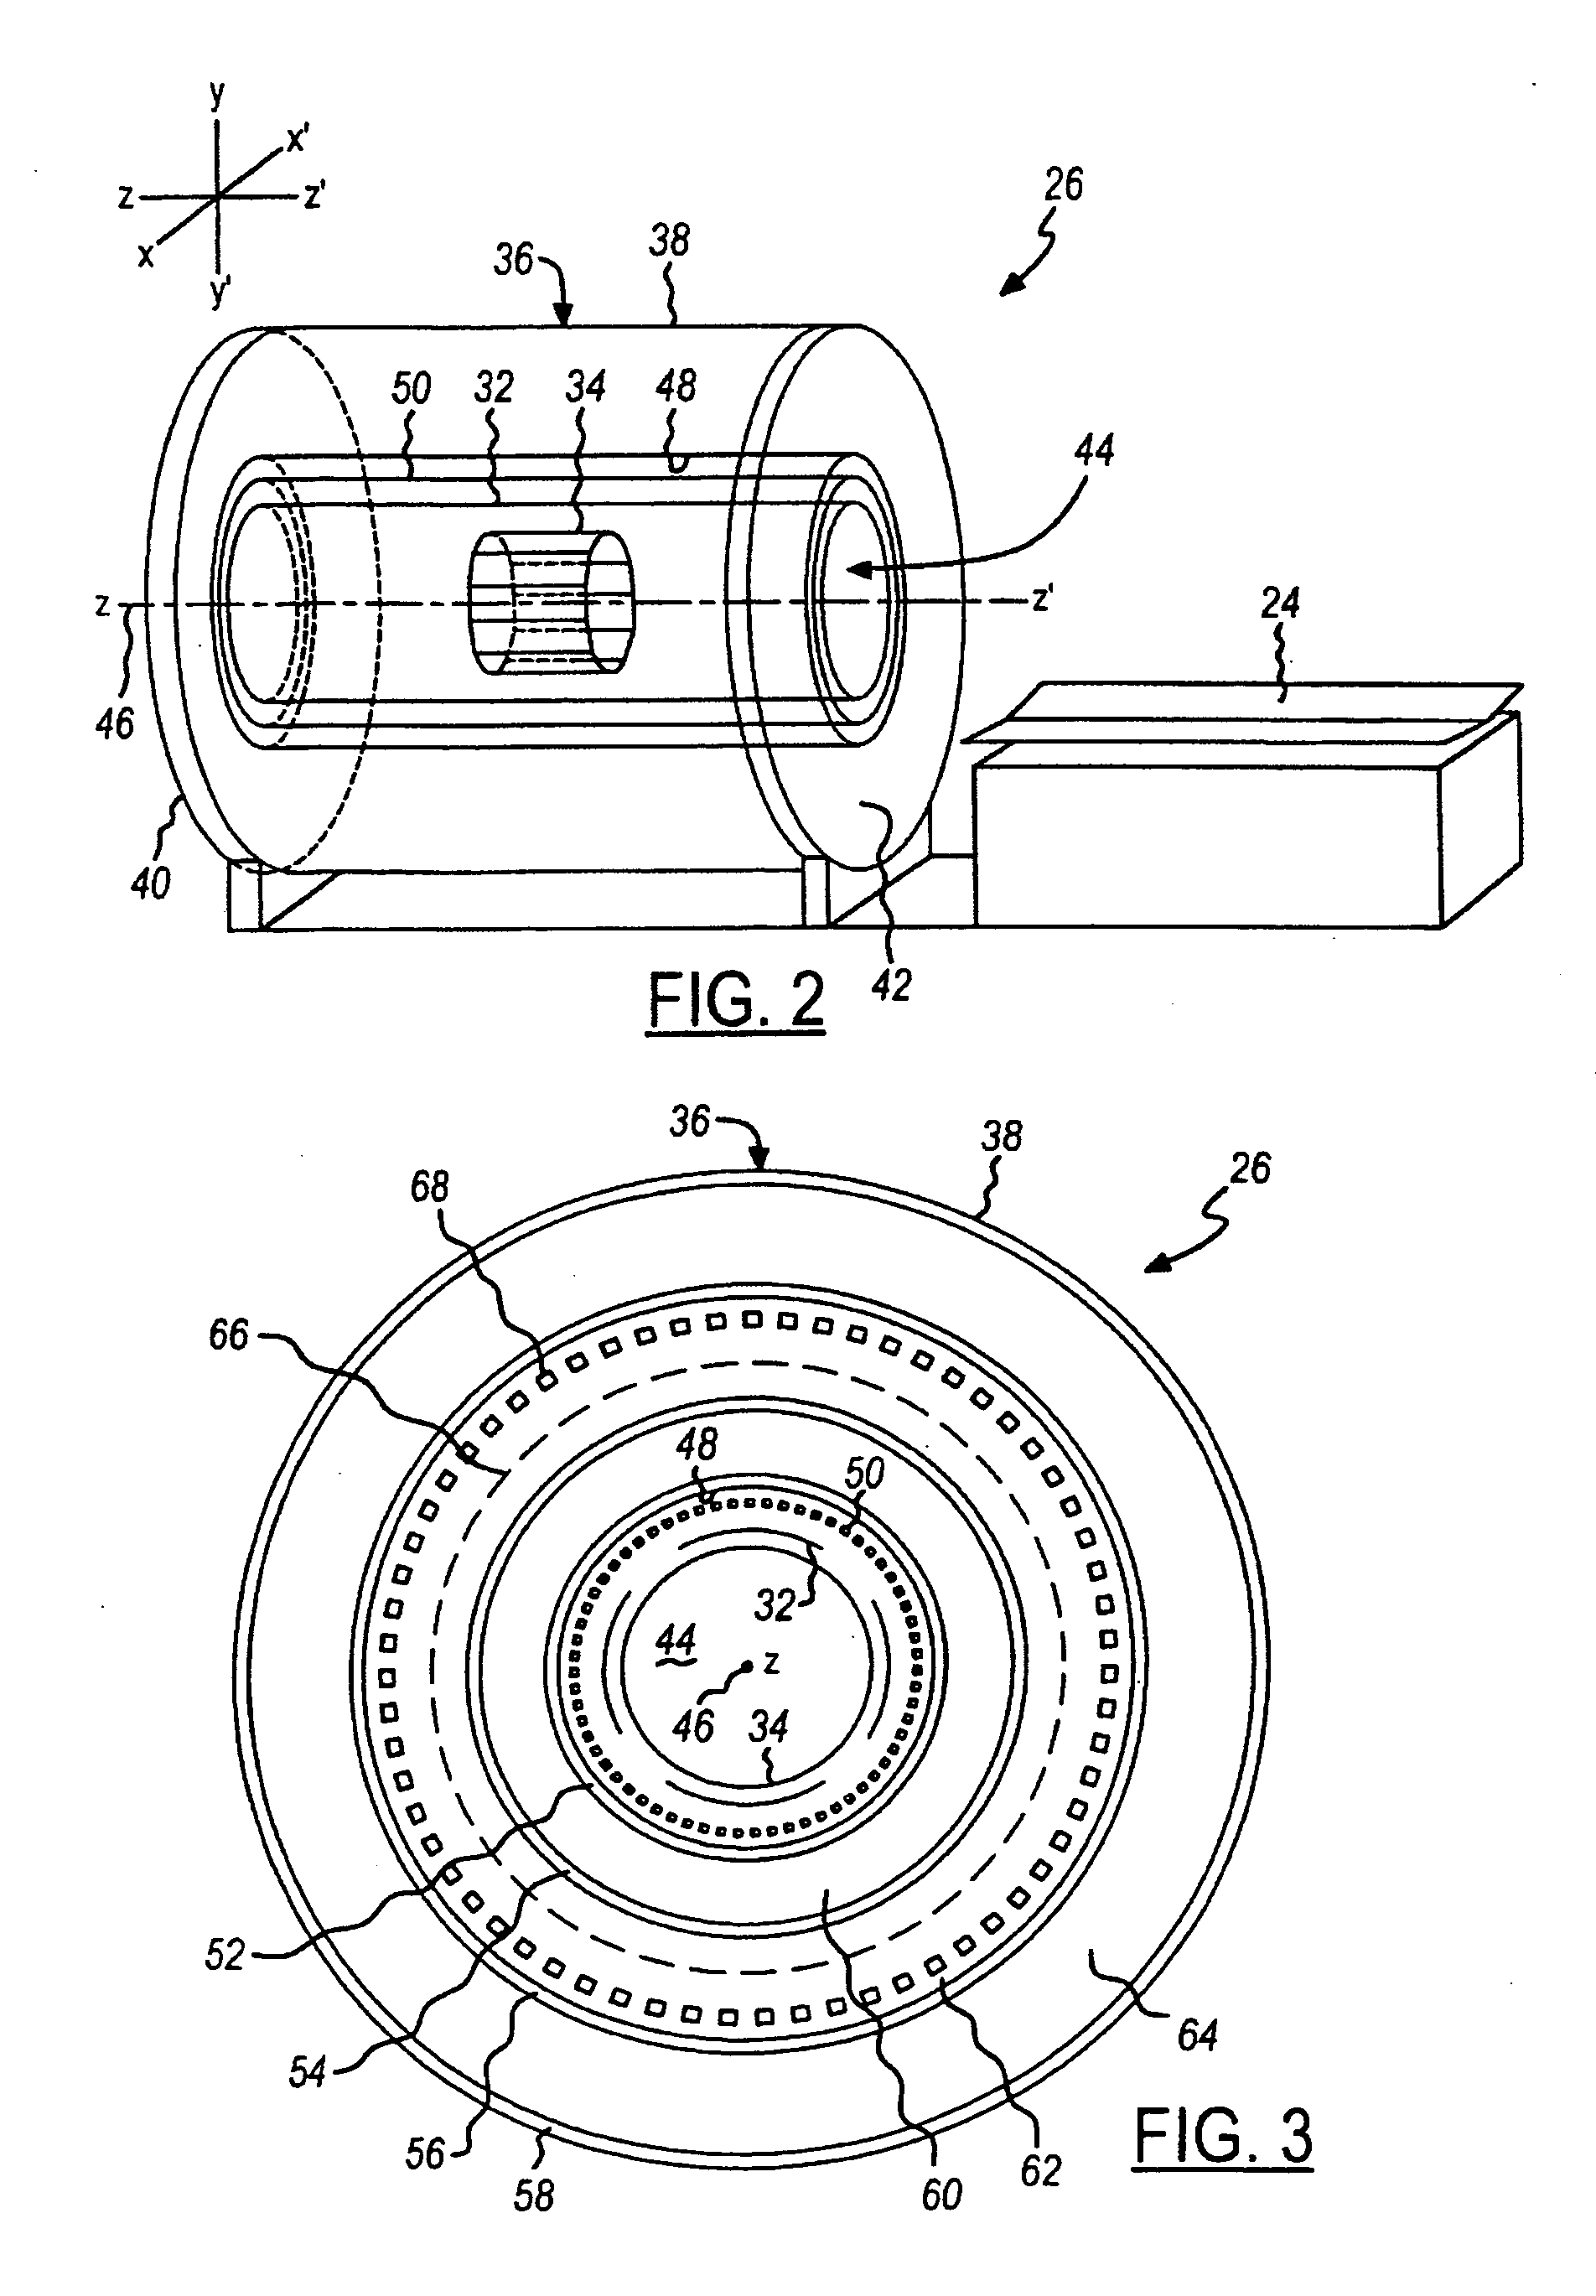 Secondary coil circuit for use with a multi-section protected superconductive magnet coil circuit